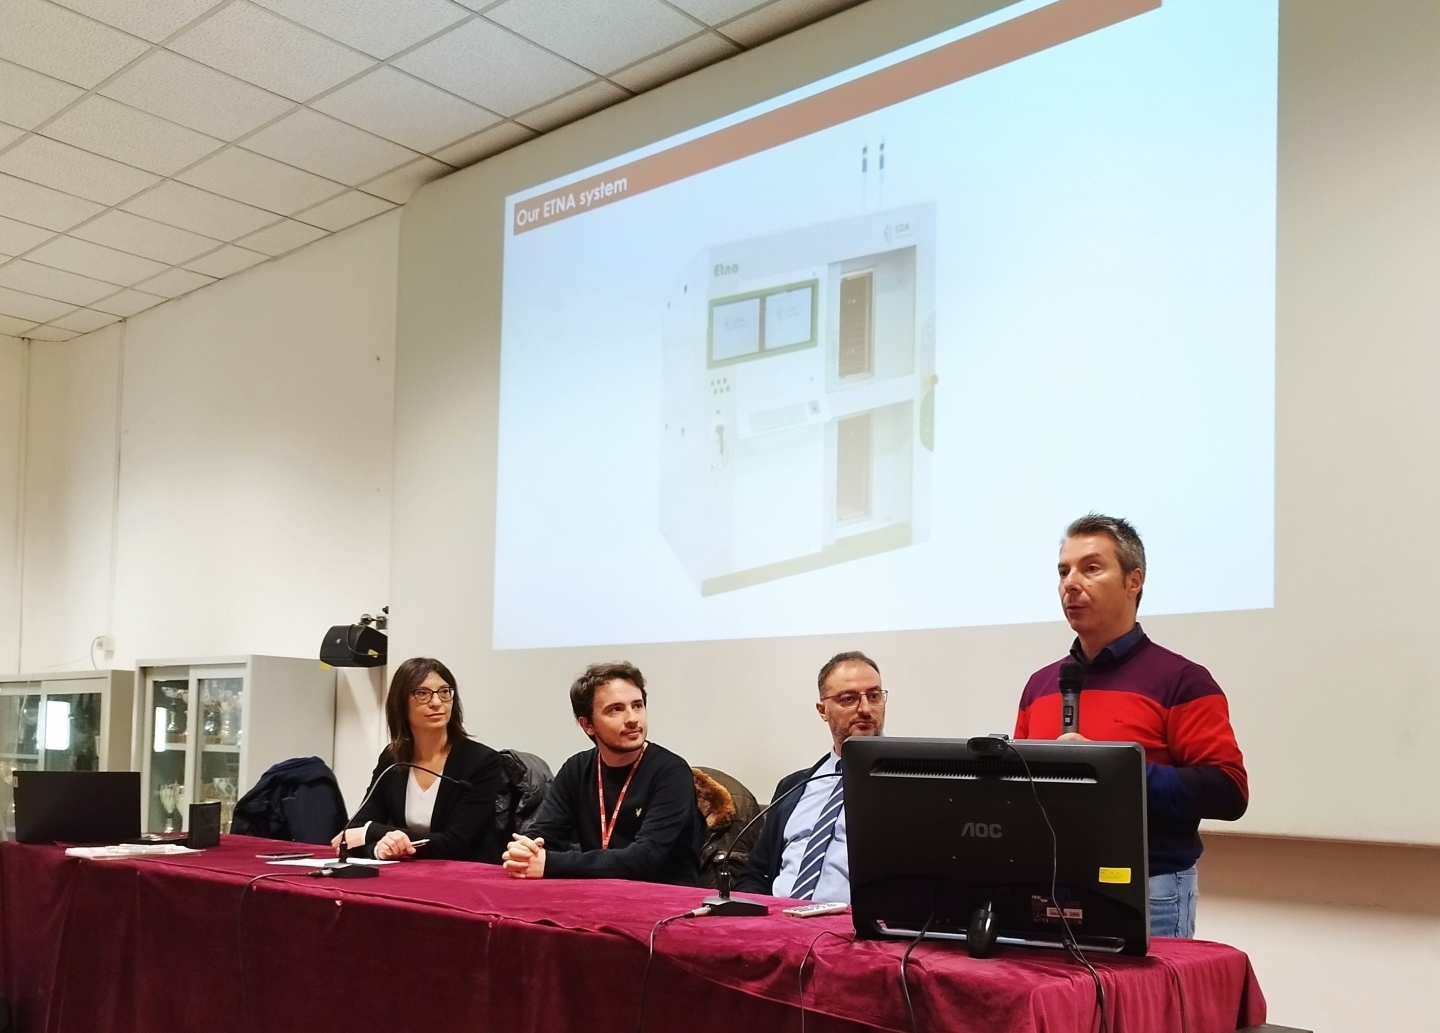 EDA Industries has met students of I.I.S. Rosatelli: presented our company and job opportunities